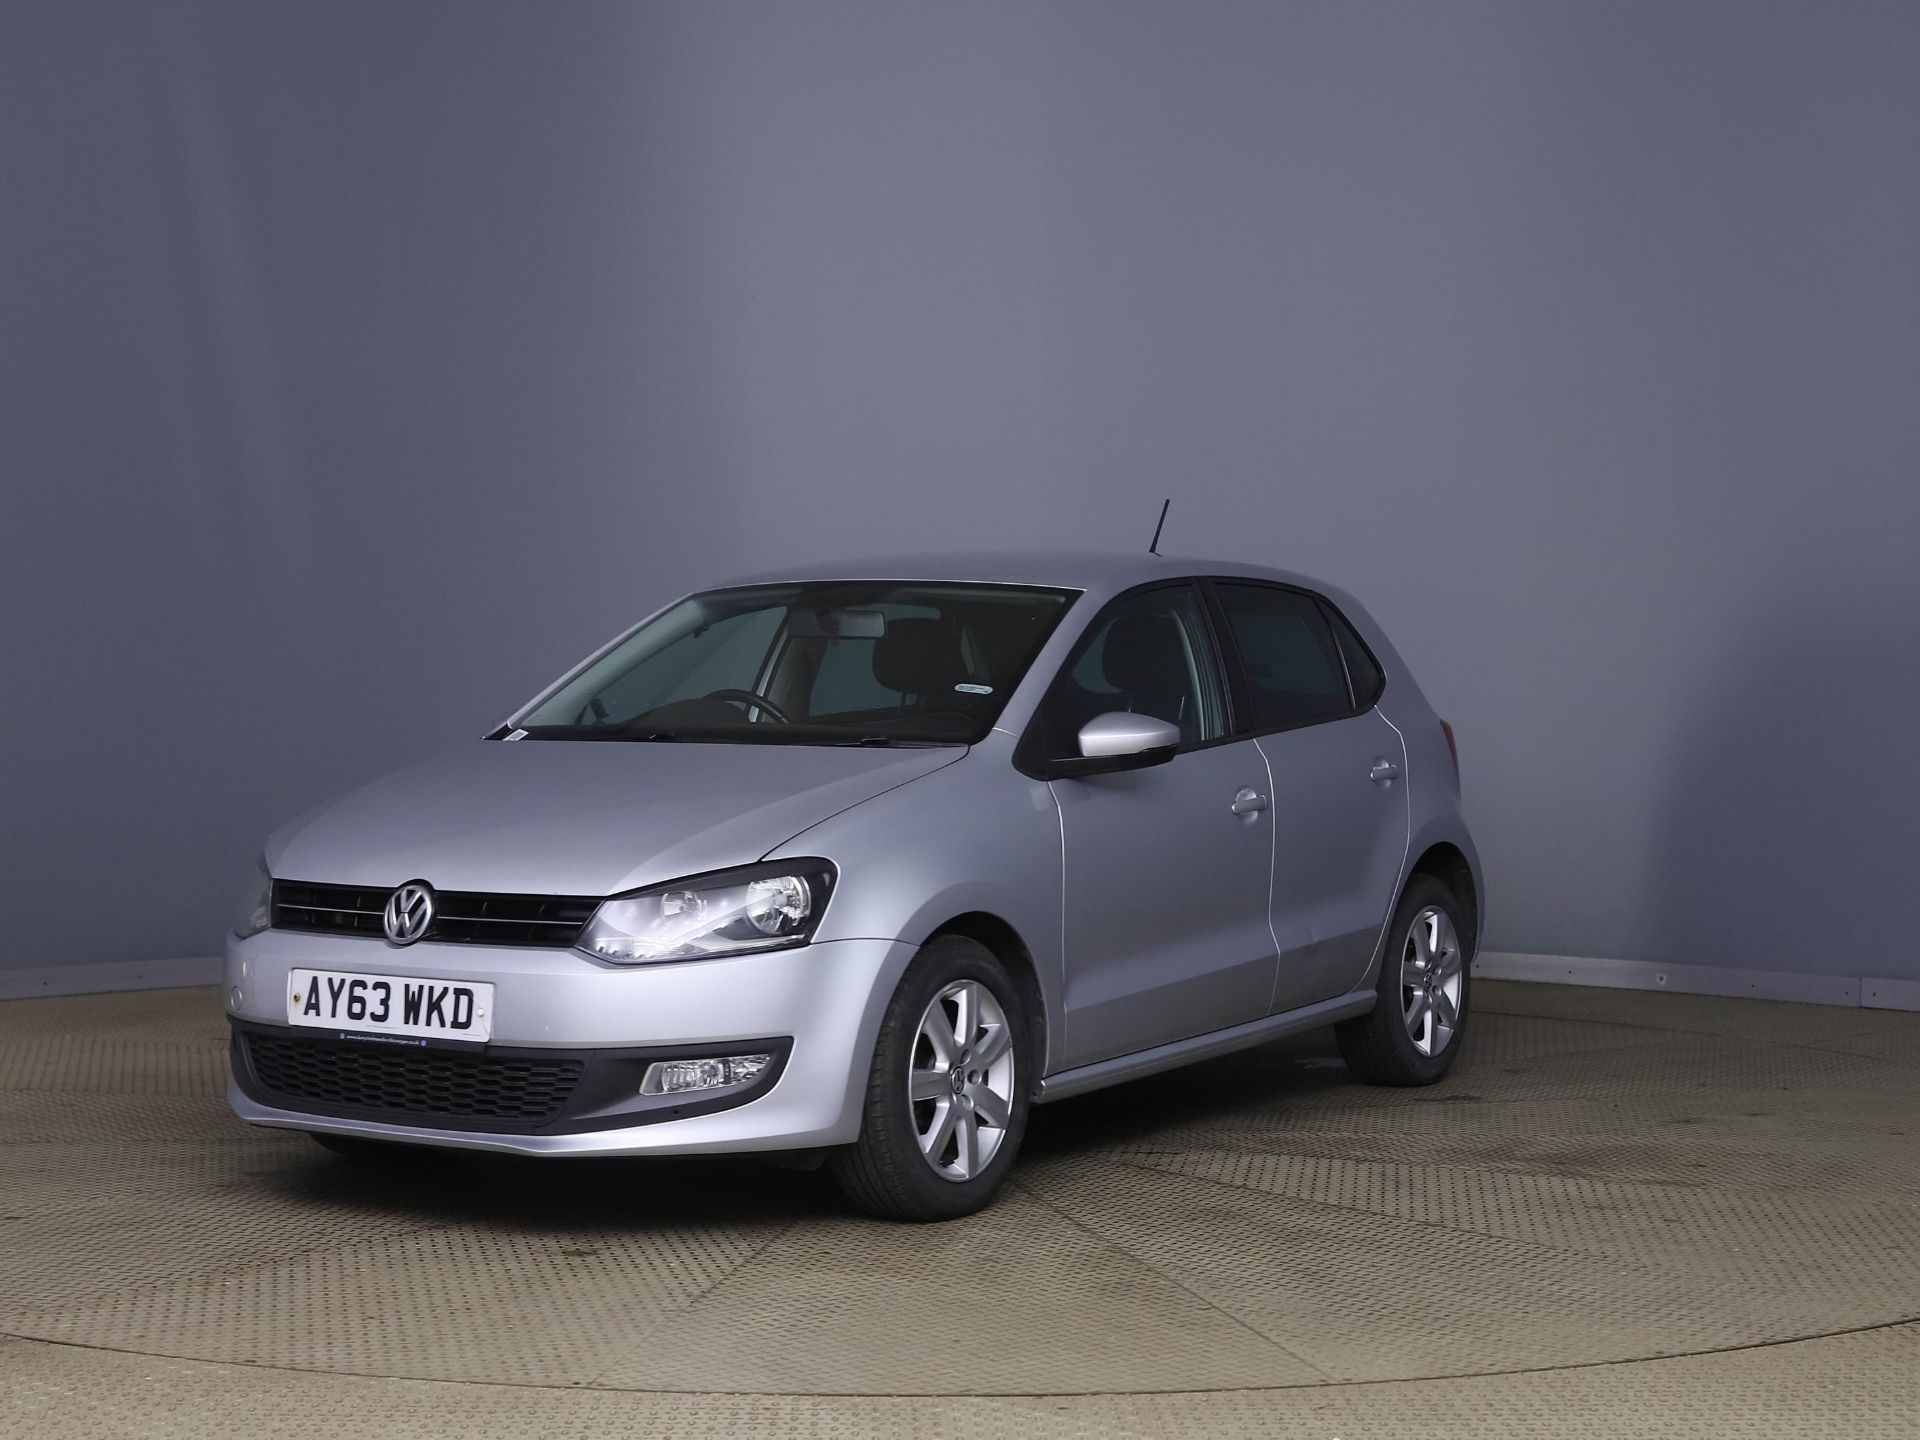 2013 Volkswagen Polo 1.2 TDI Match Edition 5dr - CL505 - NO VAT ON THE HAMMER - Locatio - Image 2 of 12